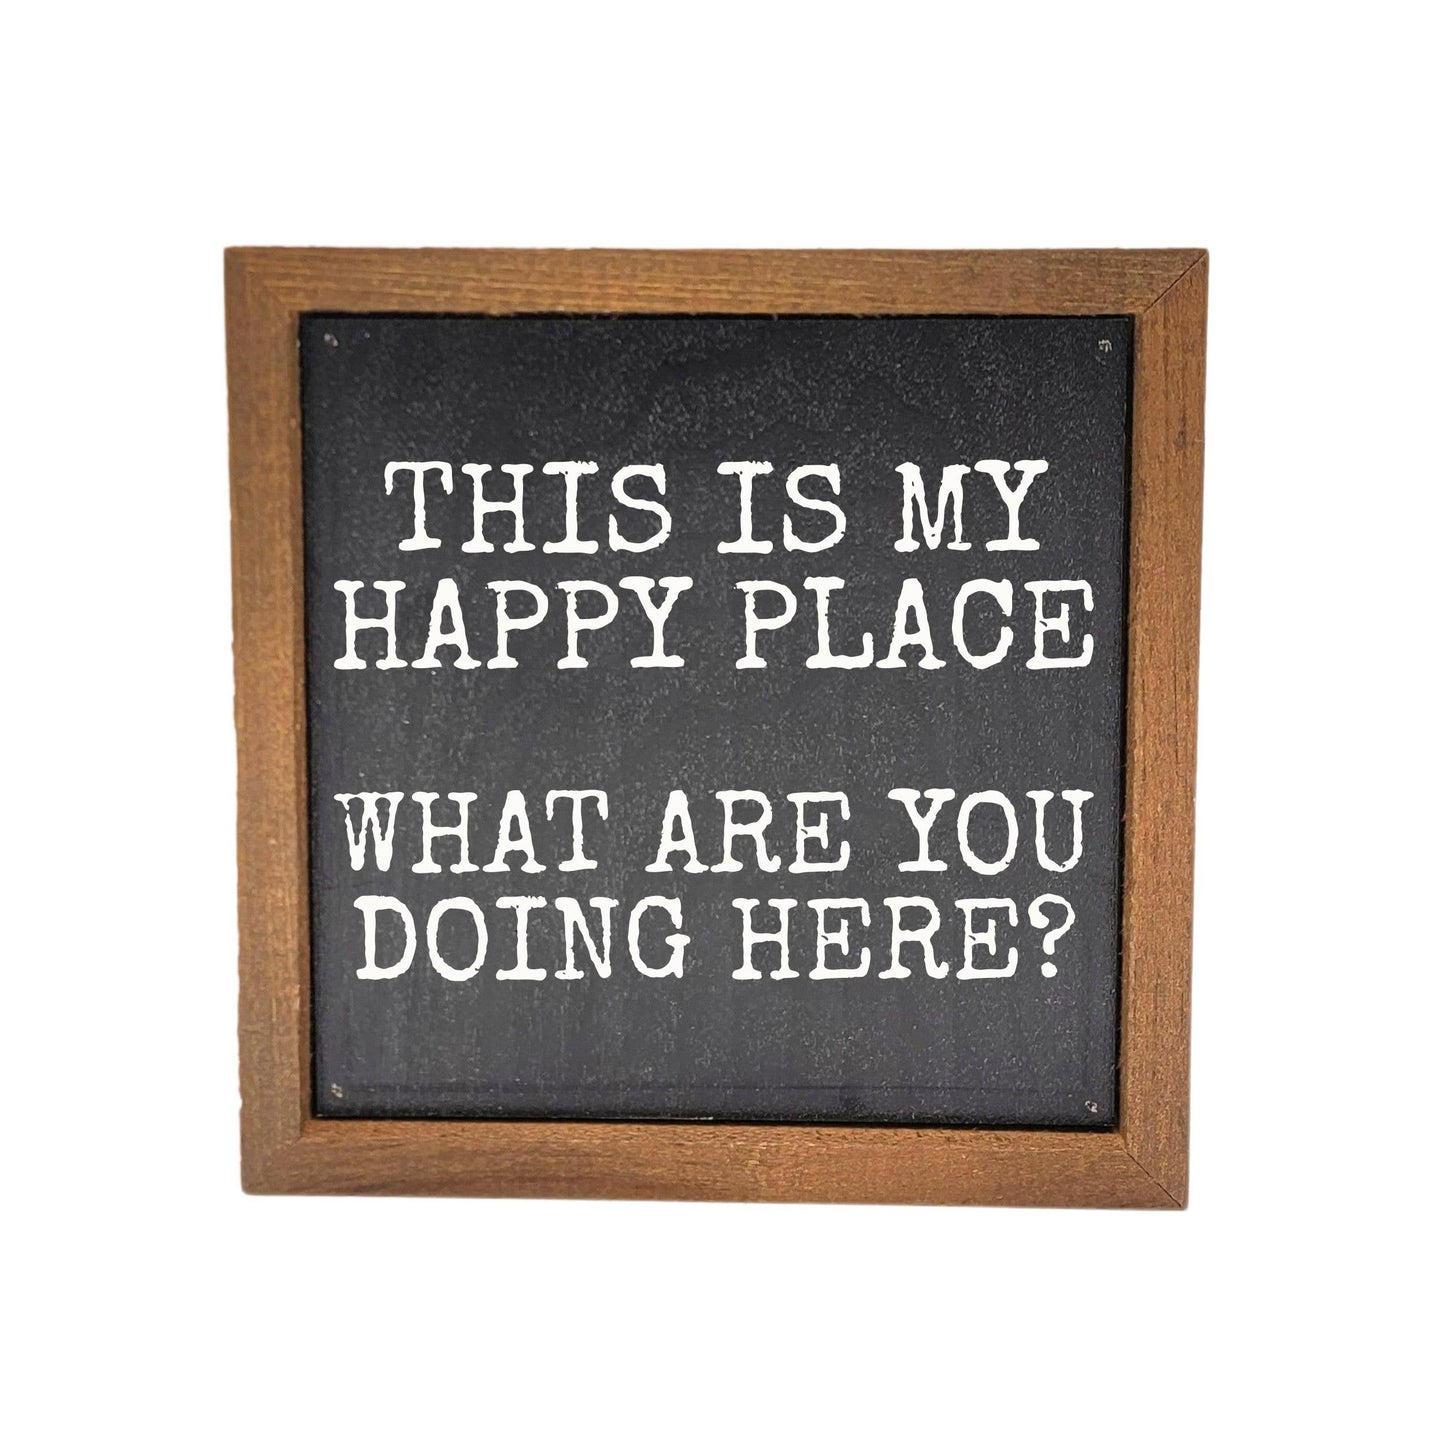 What Are You Doing Here? Home Decor Funny Sign